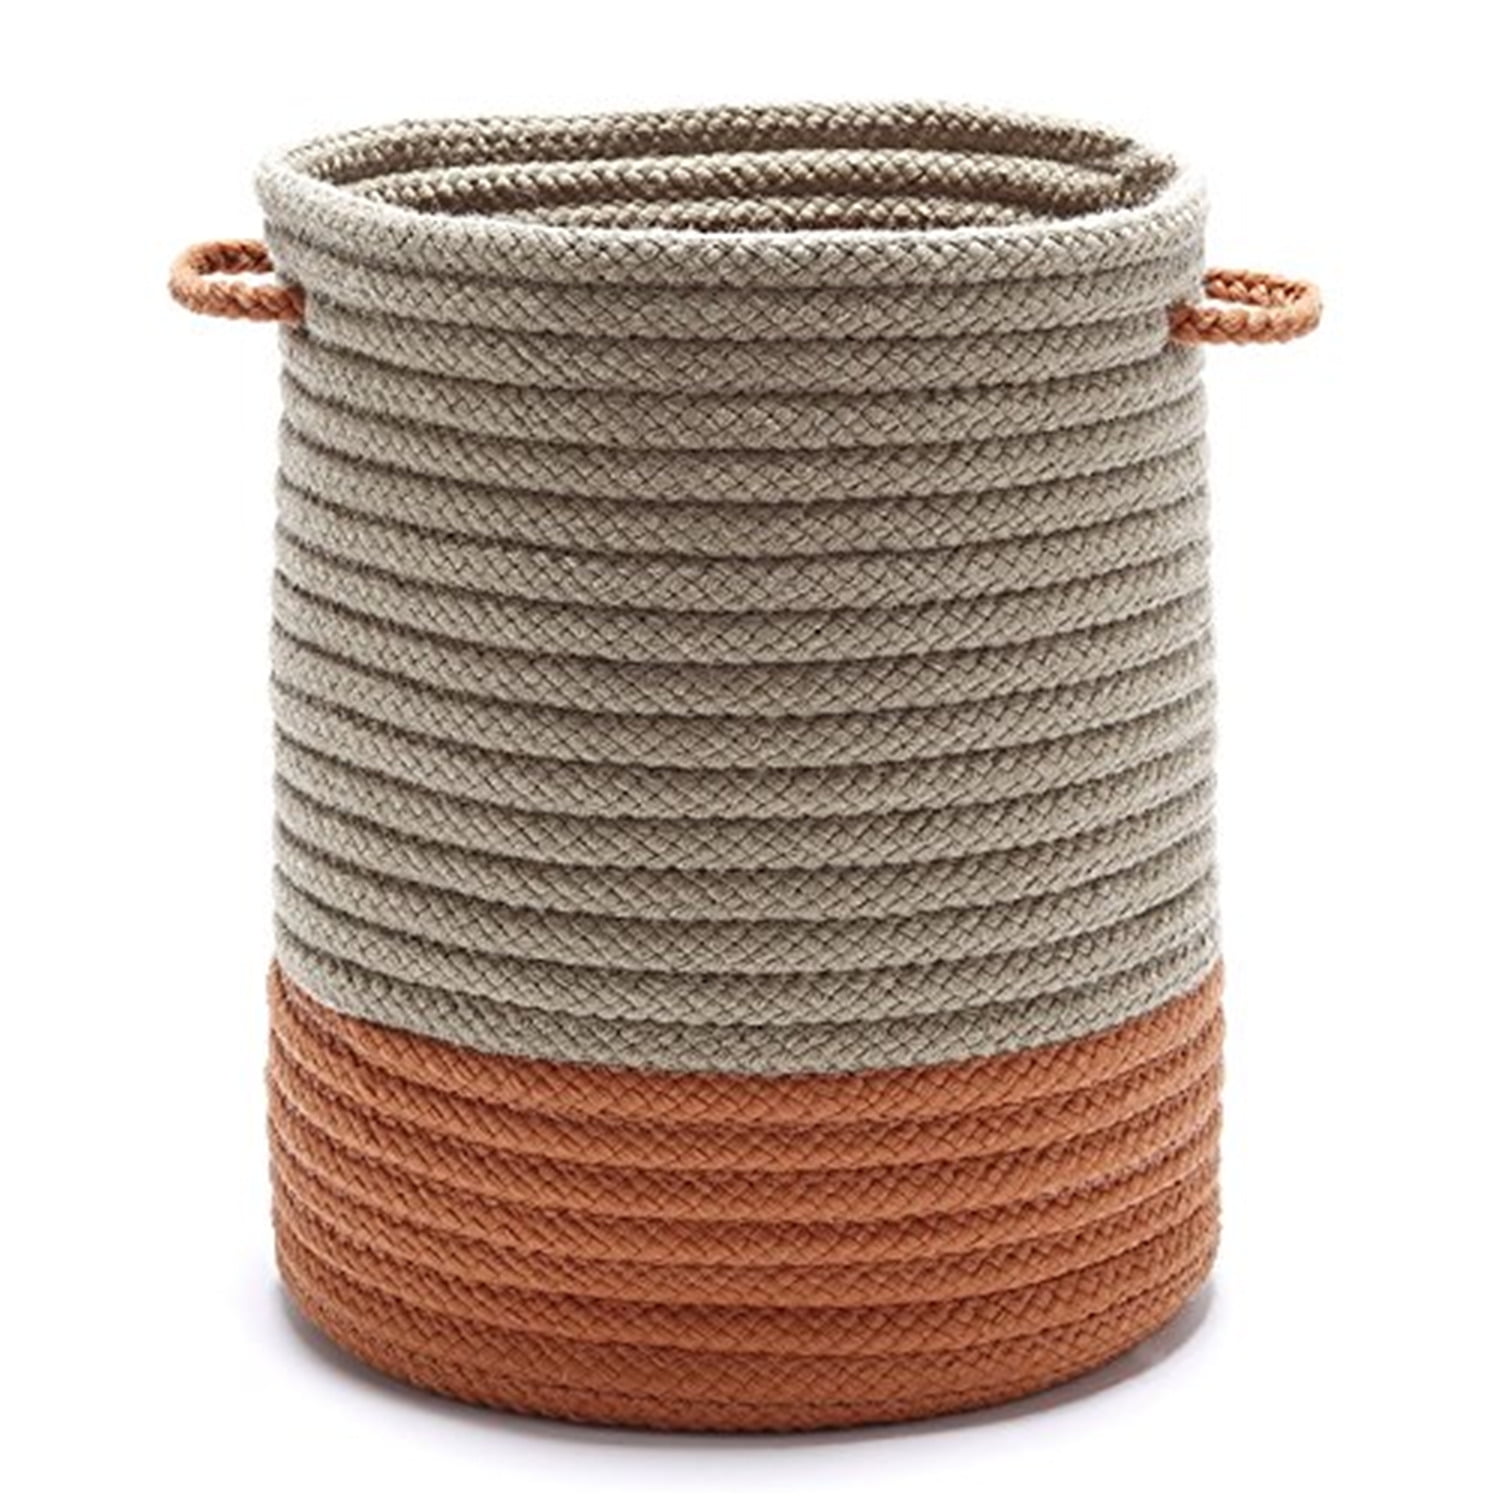 Picture of Colonial Mills IN41A012X012 12 x 12 x 12 in. Marina Round Basket, Orange & N150